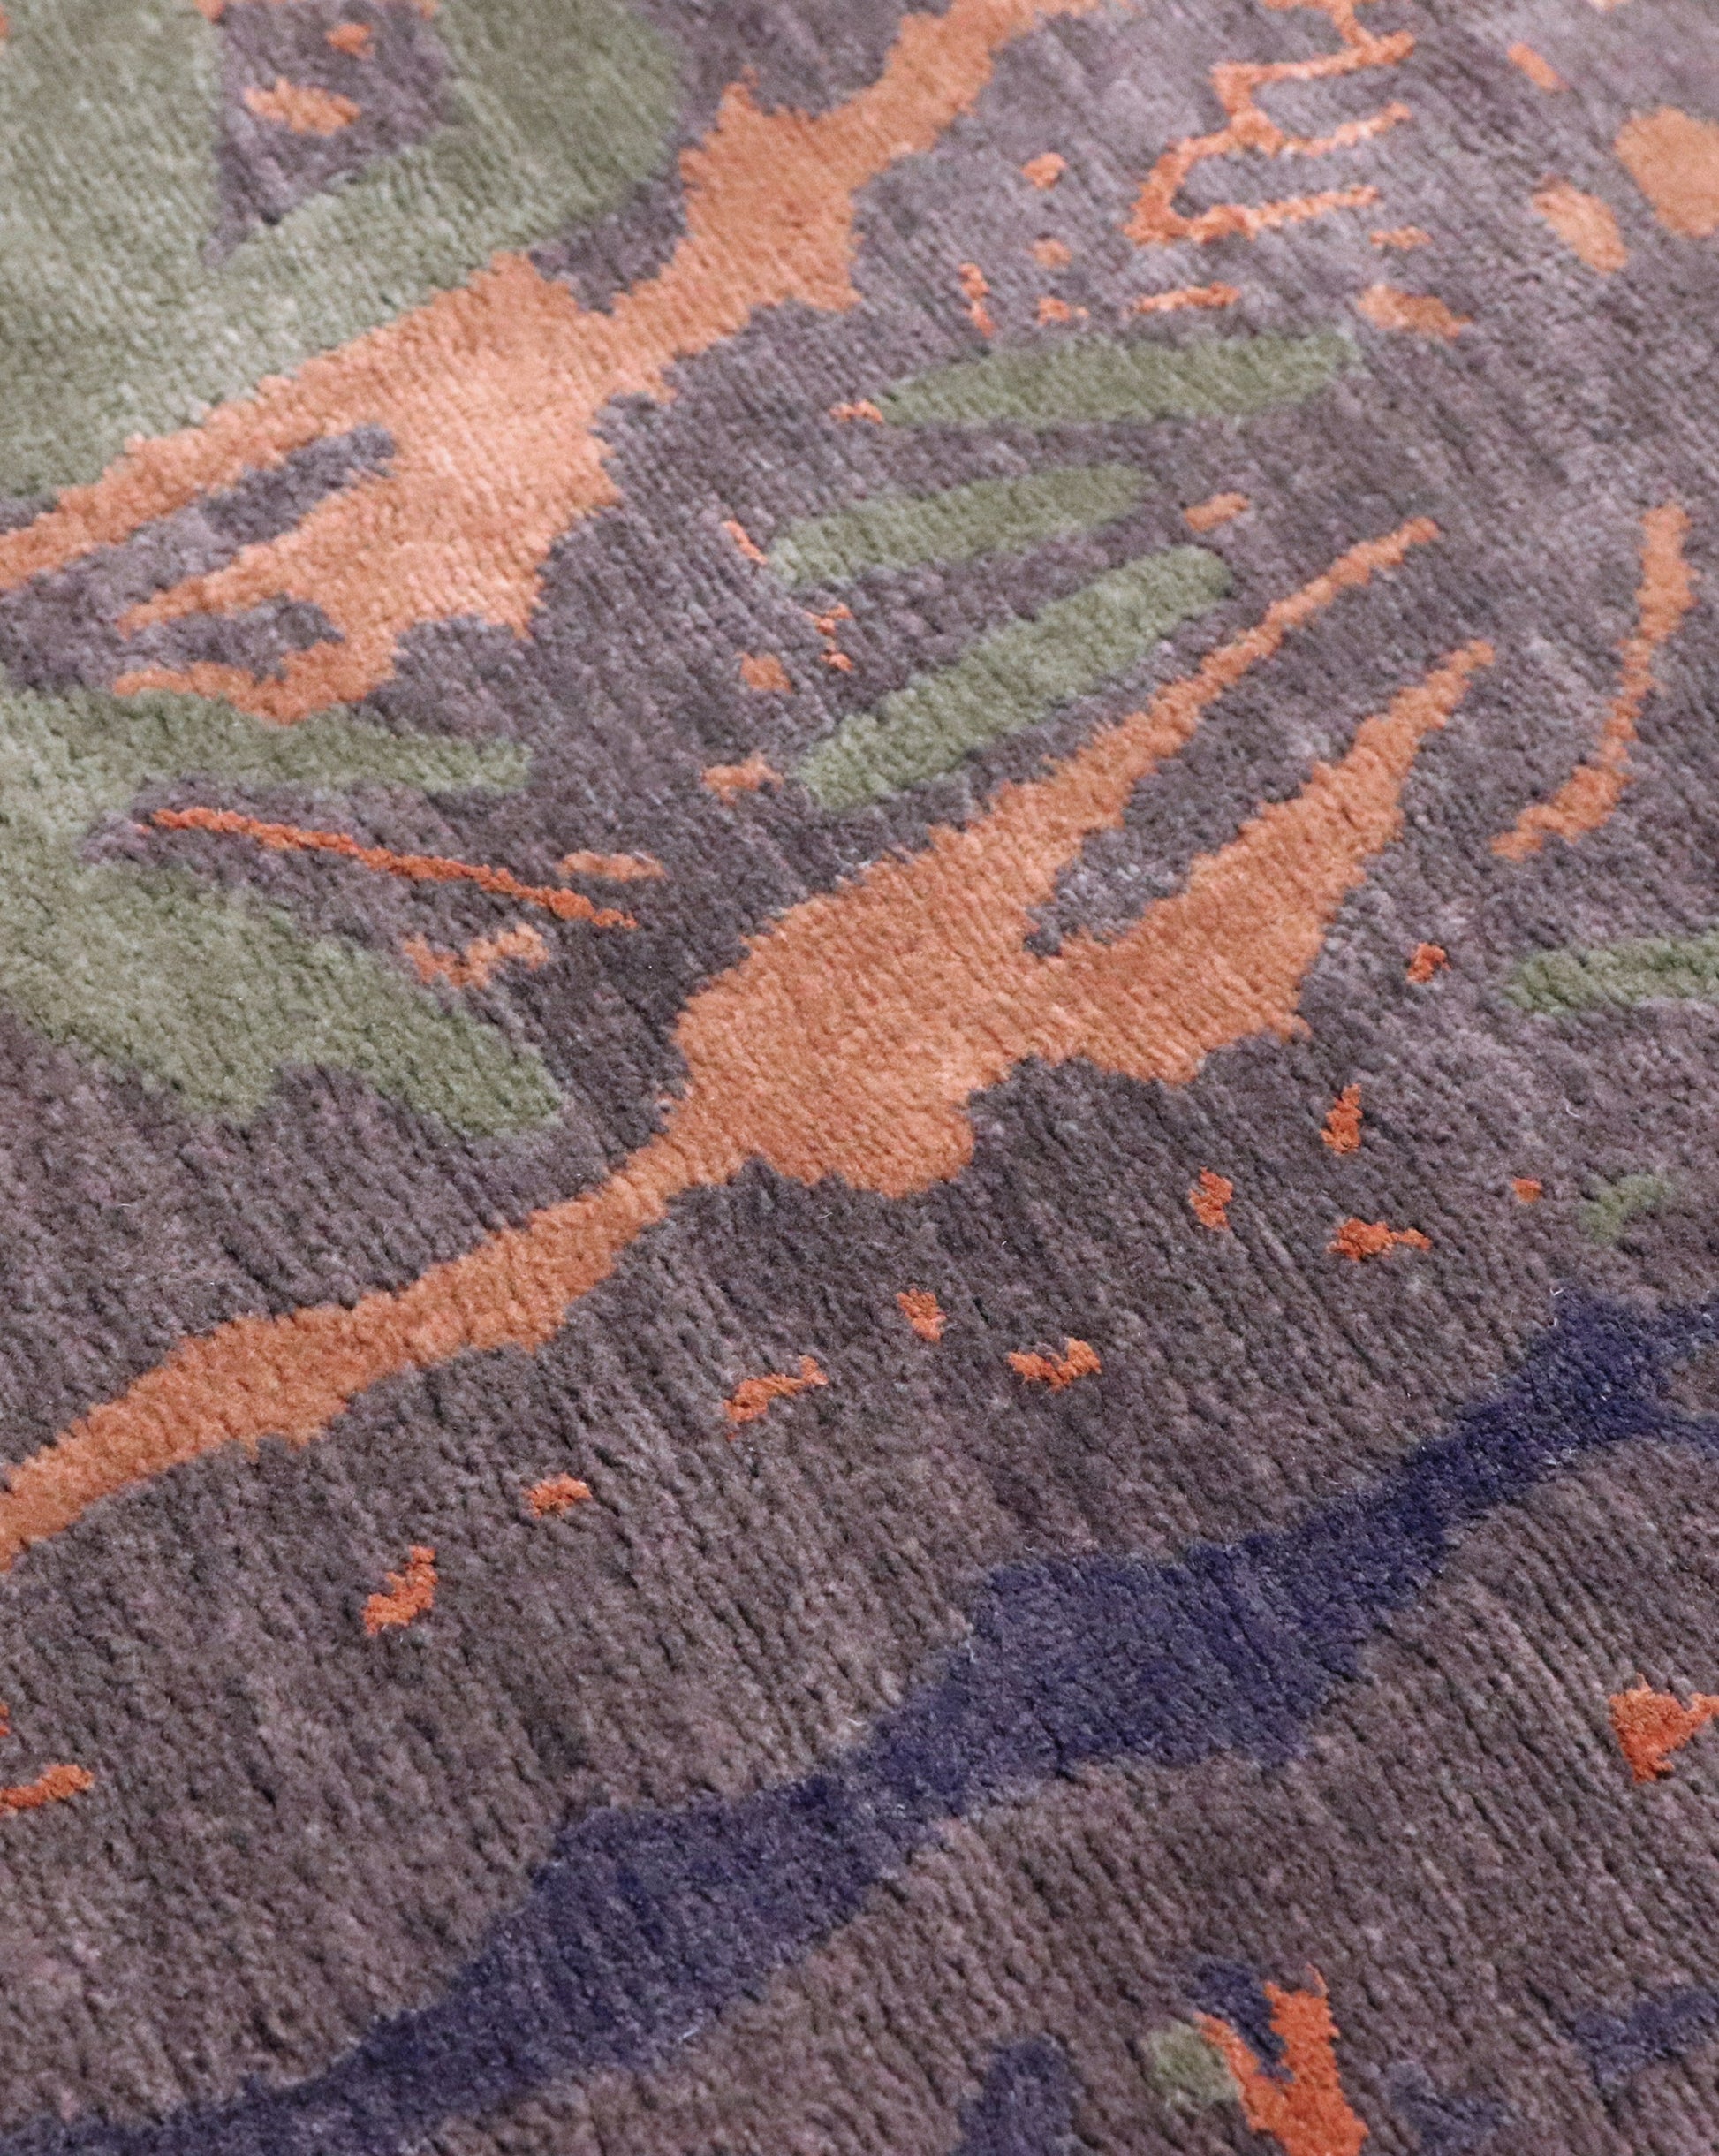 A close up of a rug from the Adriatico Hand Knotted Rug Tesoro Collection with an Adriadico design featuring vibrant orange, green, and blue colors